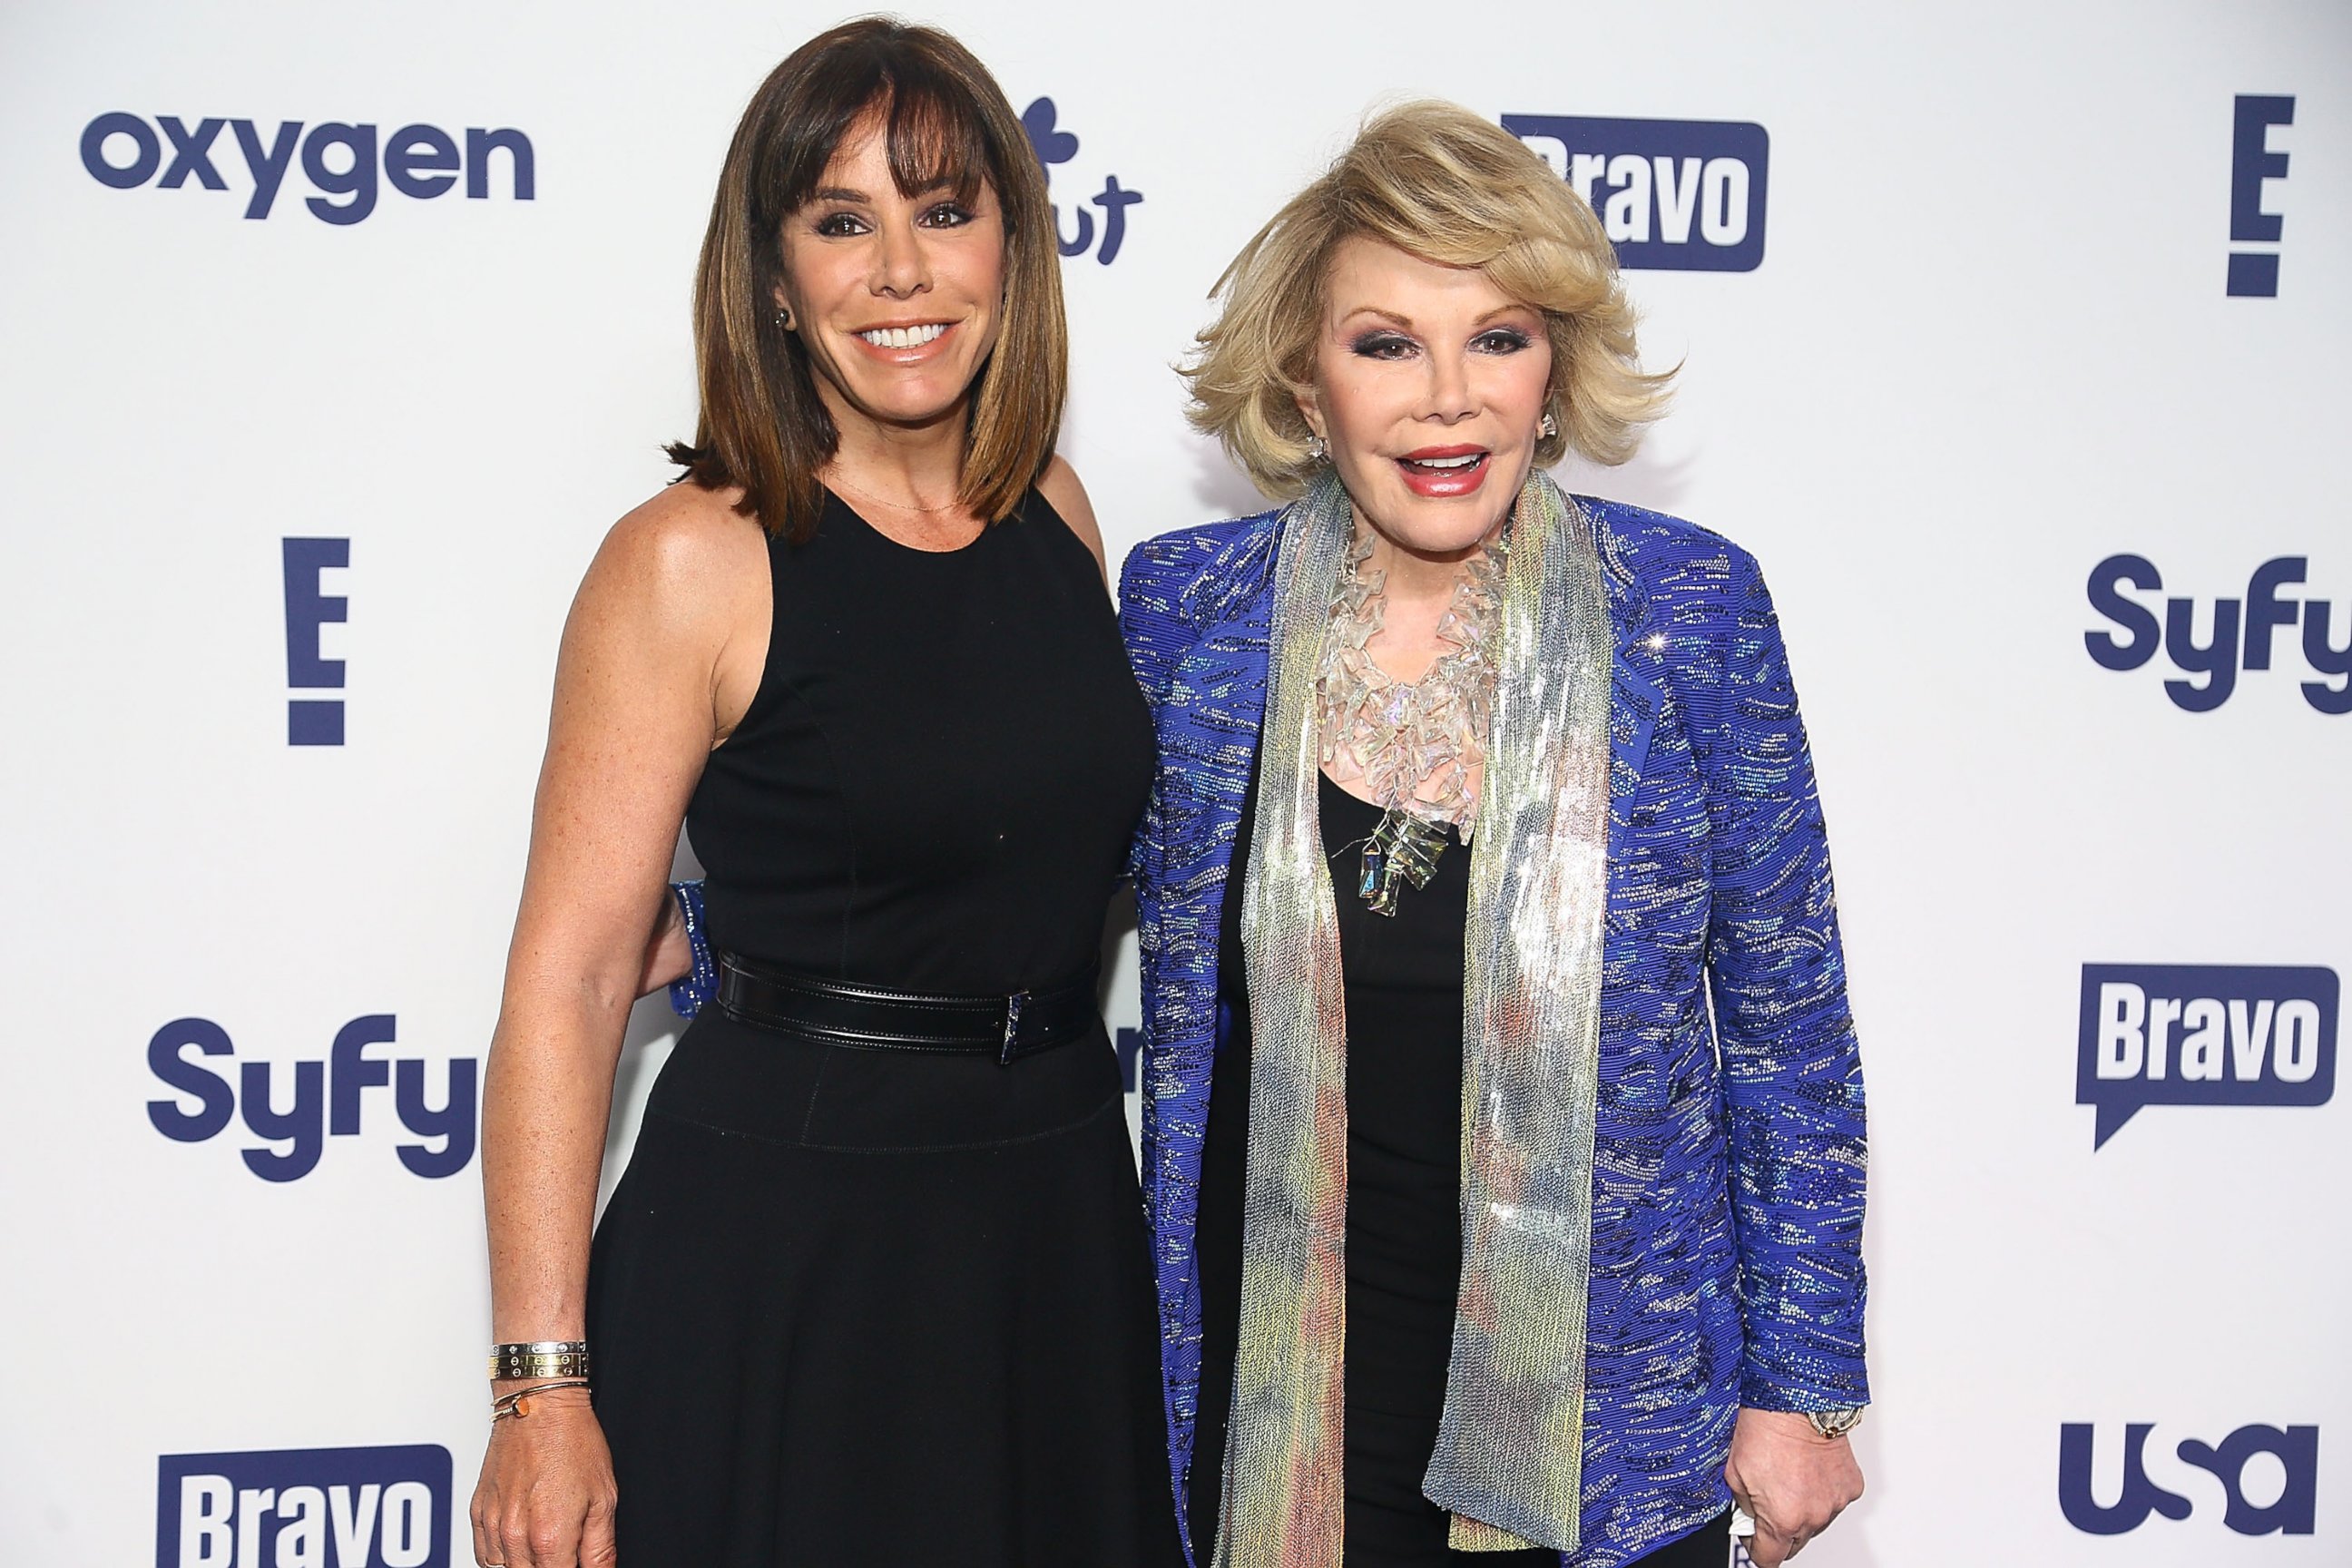 PHOTO: (L-R) Melissa Rivers and Joan Rivers attend the 2014 NBCUniversal Cable Entertainment Upfronts at The Jacob K. Javits Convention Center in this May 15, 2014, file photo in New York City. 